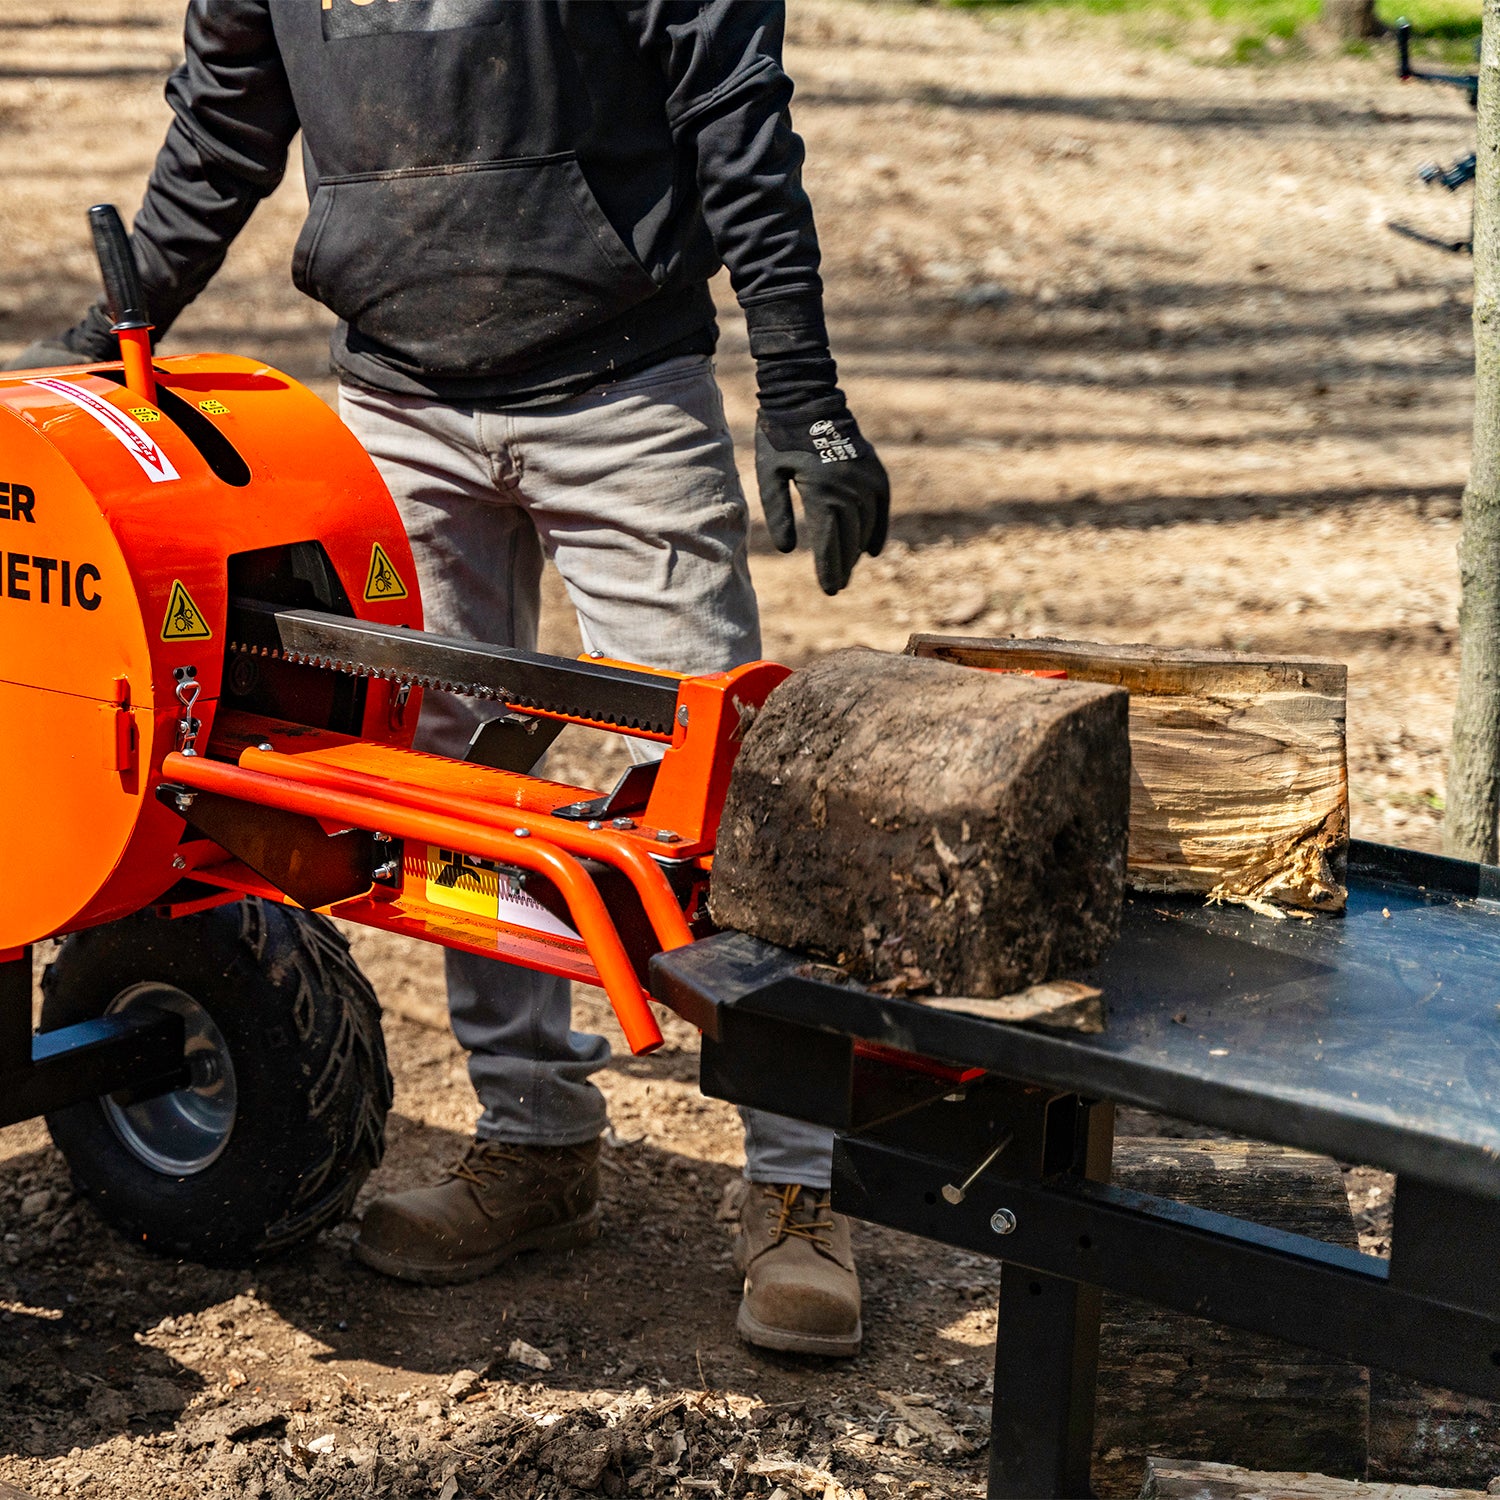 40-Ton 7 HP 208cc Certified Commercial Horizontal Kinetic Log Splitter with  Kohler Engine & 1-Sec Cycle Time